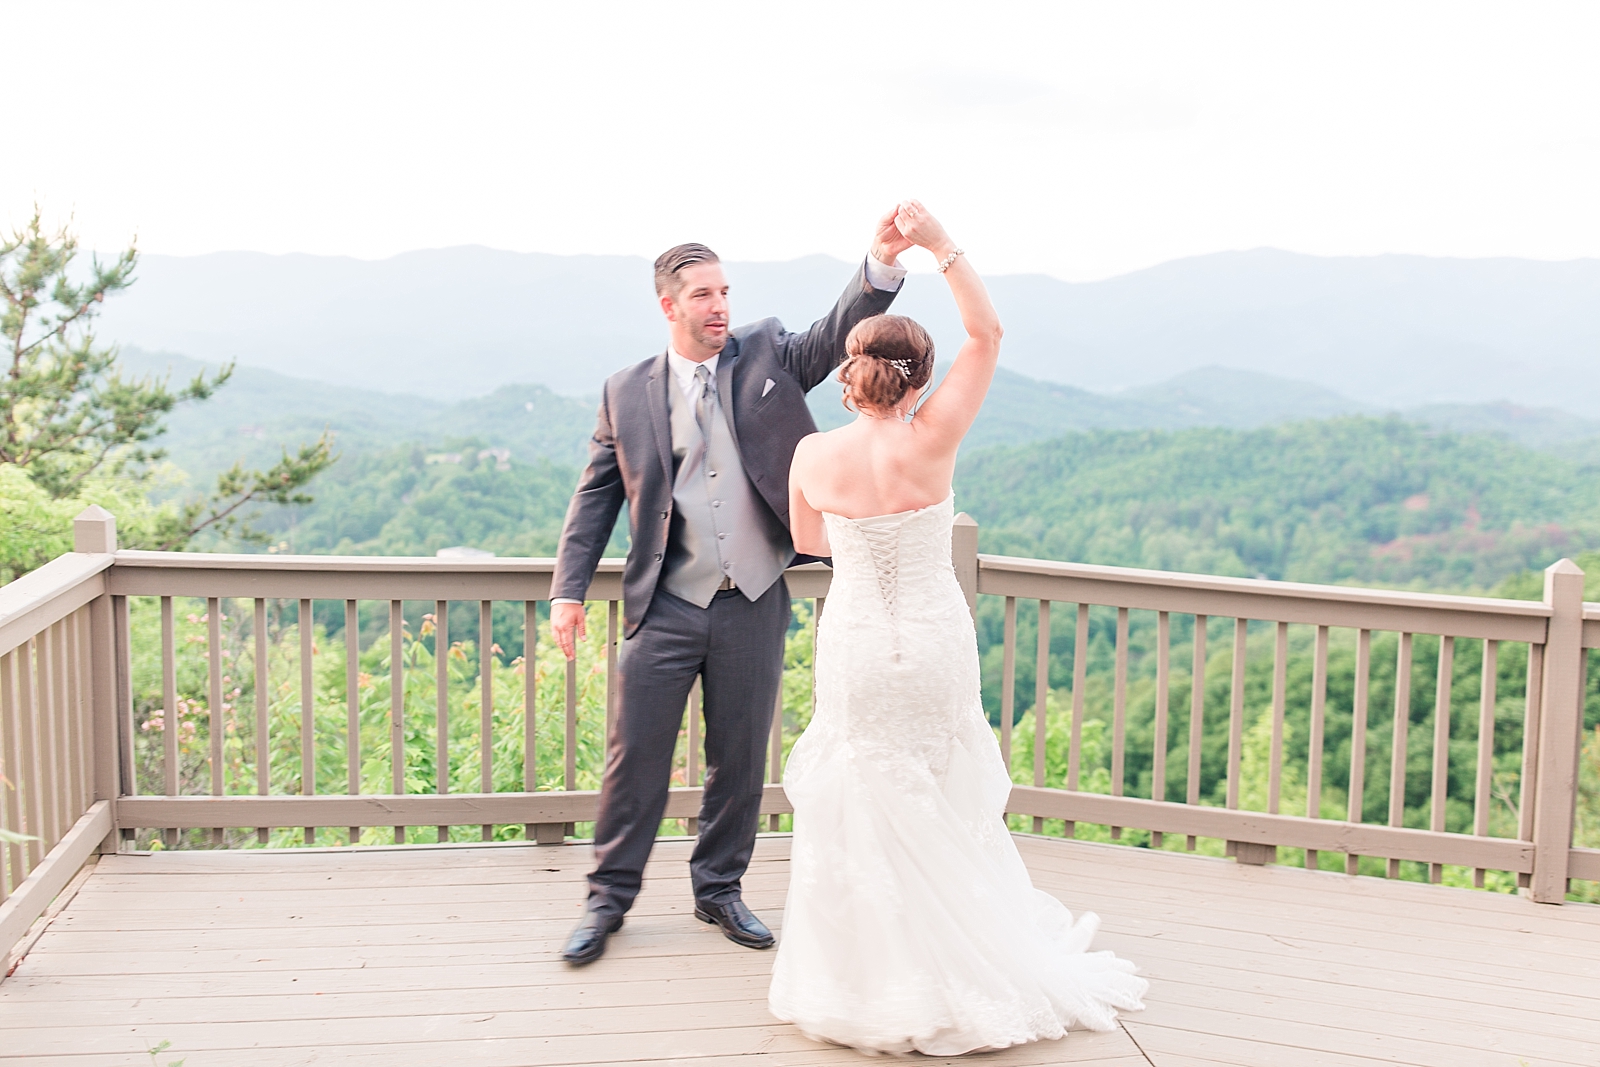 Hawkesdene Wedding Bride and Groom Twirling With View of Mountains Photo